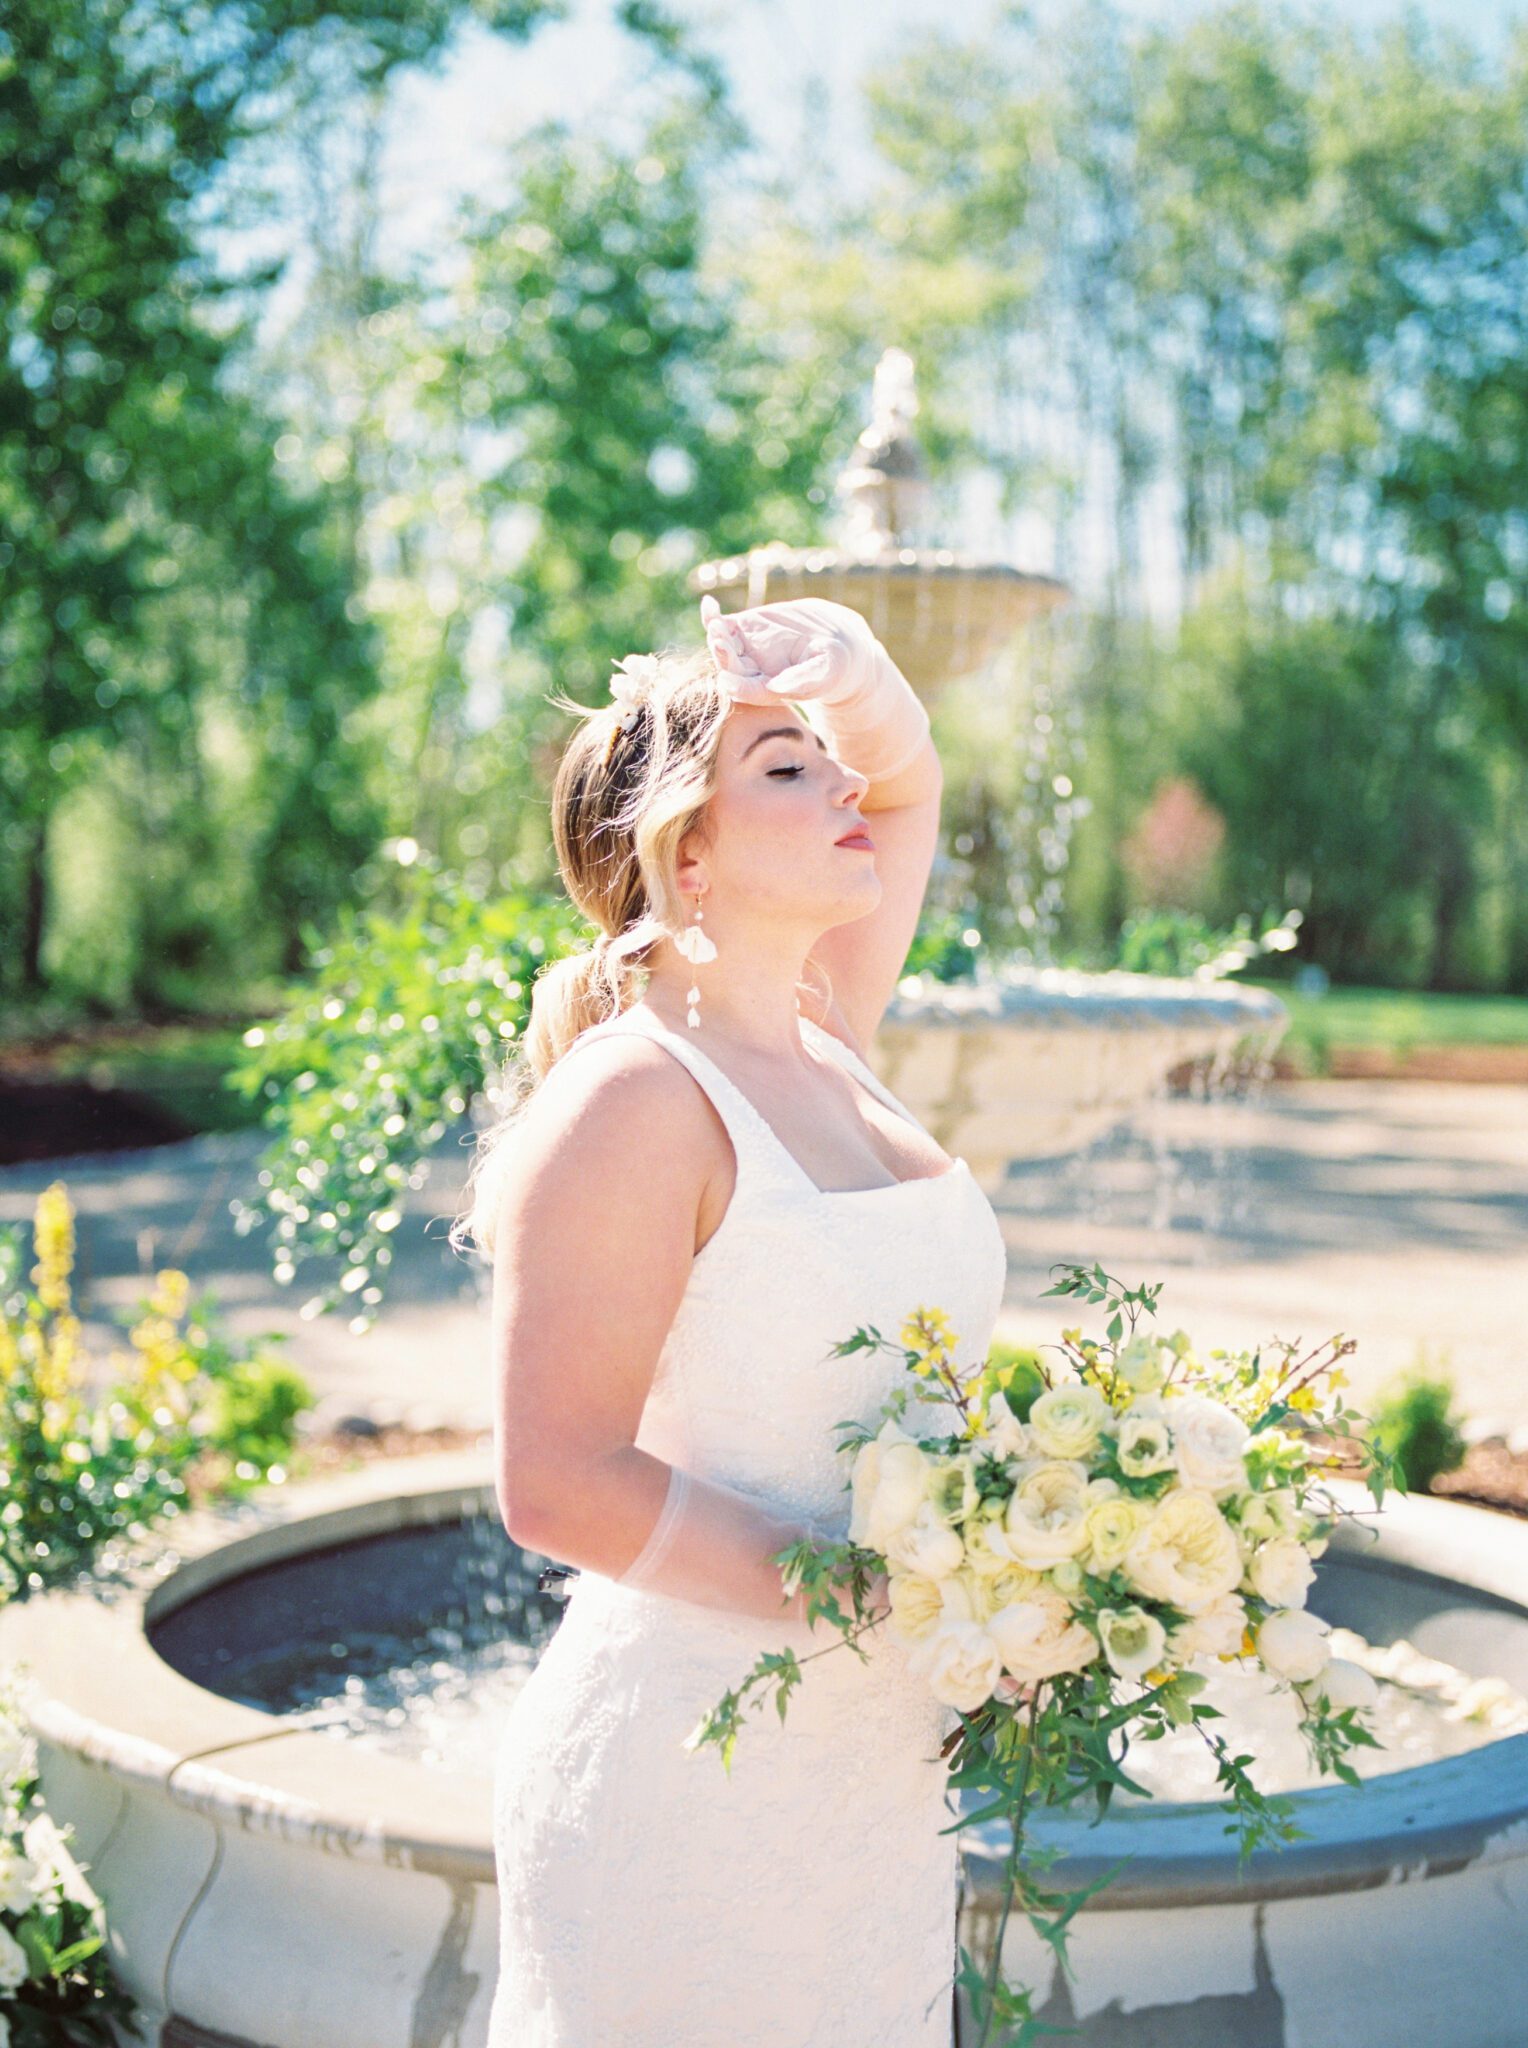 A beautiful bride wearing floral and pearl headpiece by Joanna Bisley Designs, and wearing sophisticated yet whimsical bridal gown. Outdoor spring wedding inspiration, bridal bouquet of pale yellow flowers, ivory roses and peonies with greenery. 